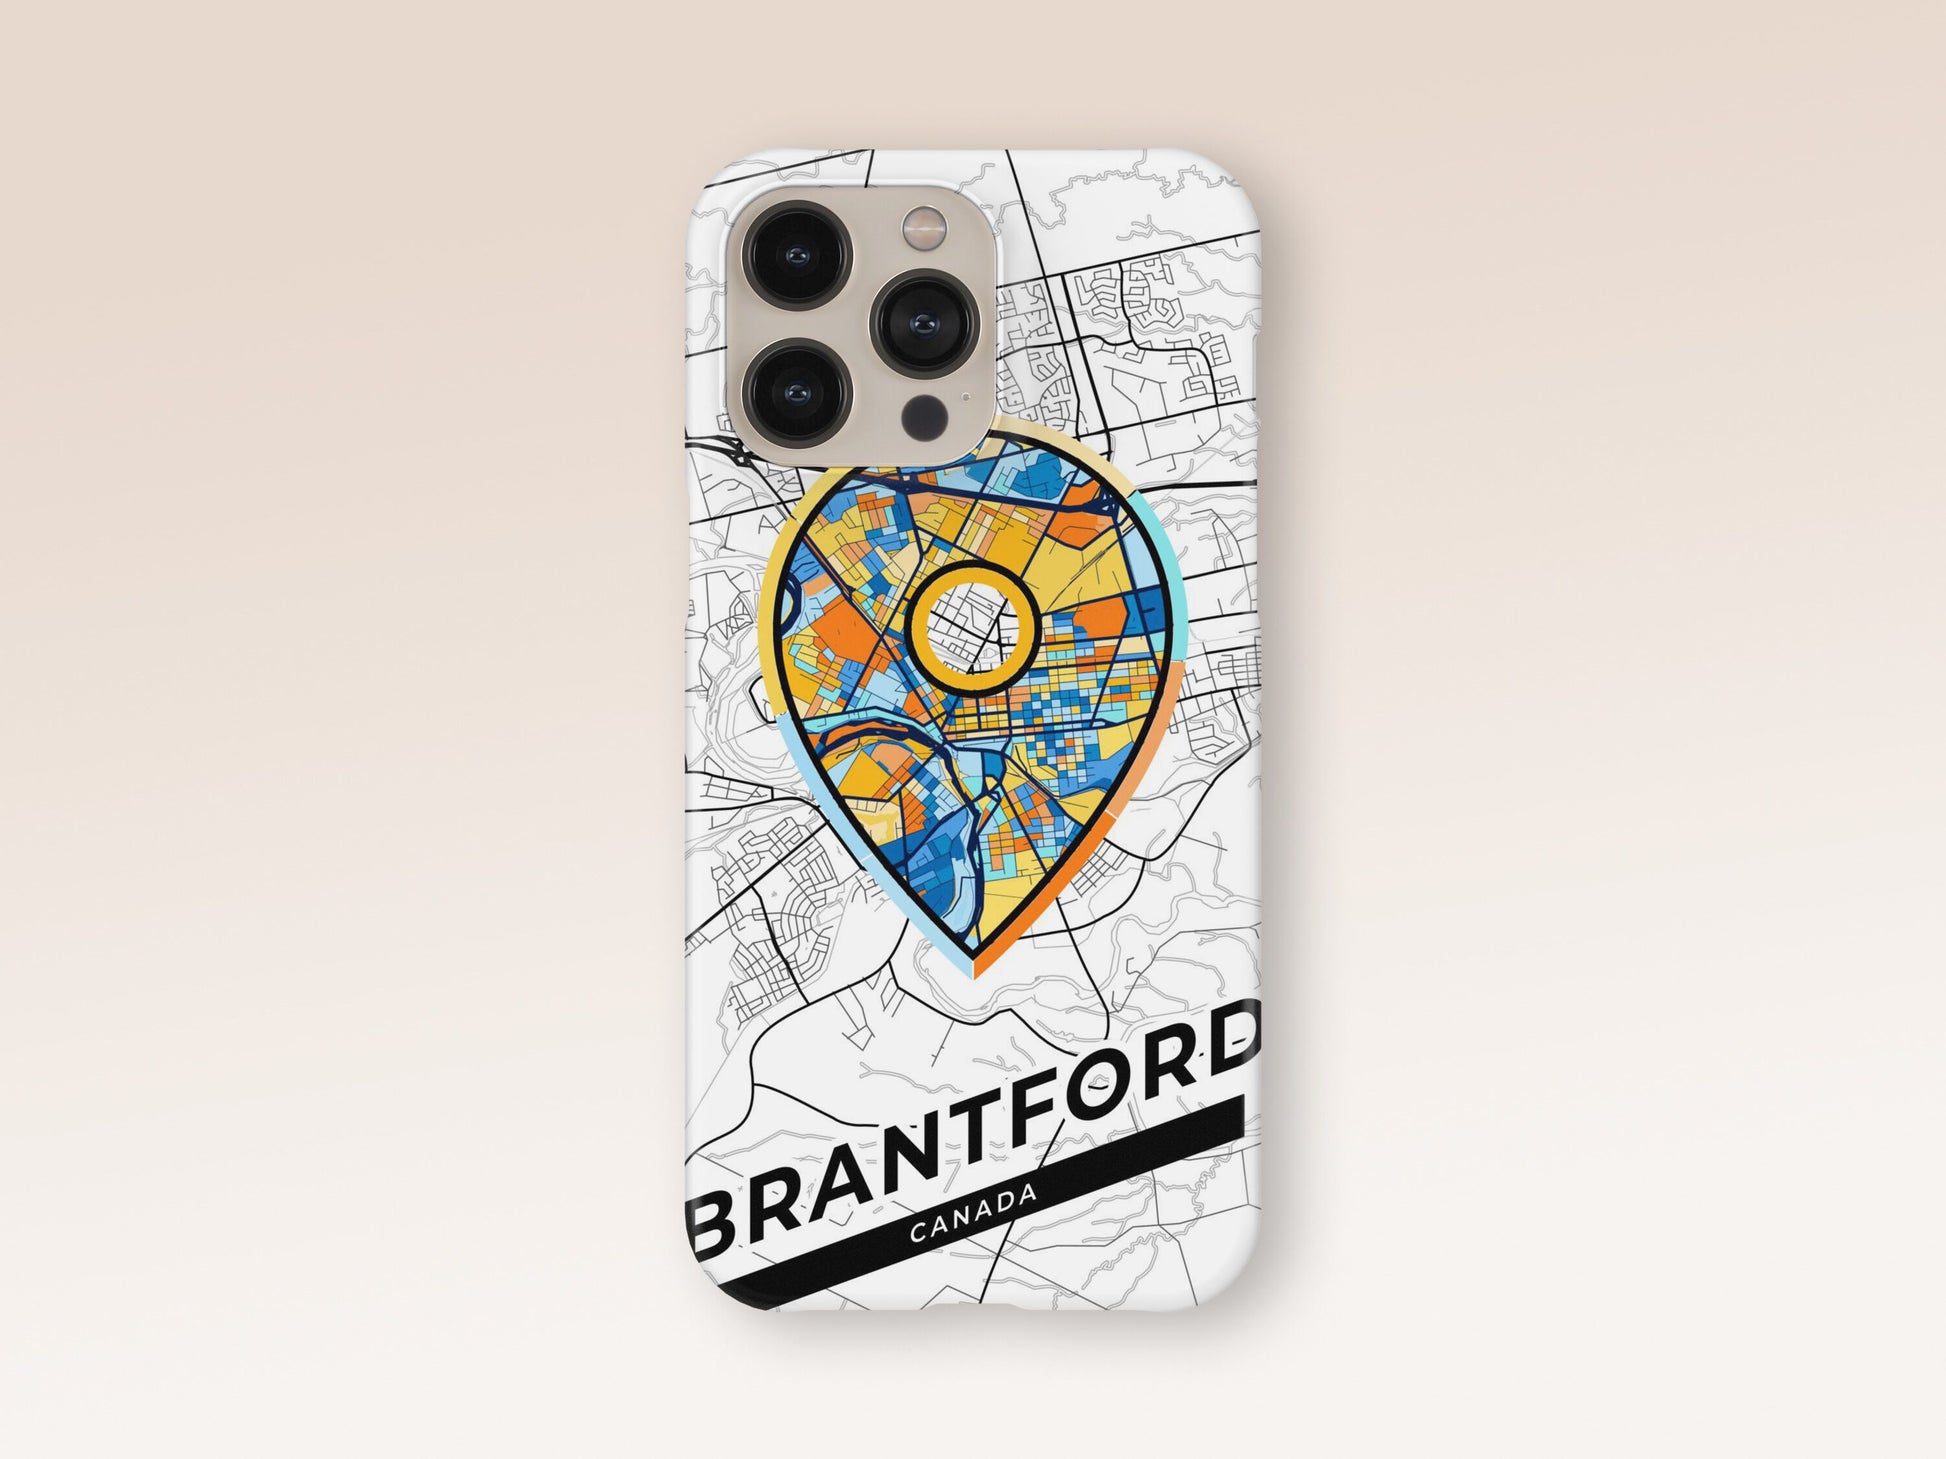 Brantford Canada slim phone case with colorful icon. Birthday, wedding or housewarming gift. Couple match cases. 1